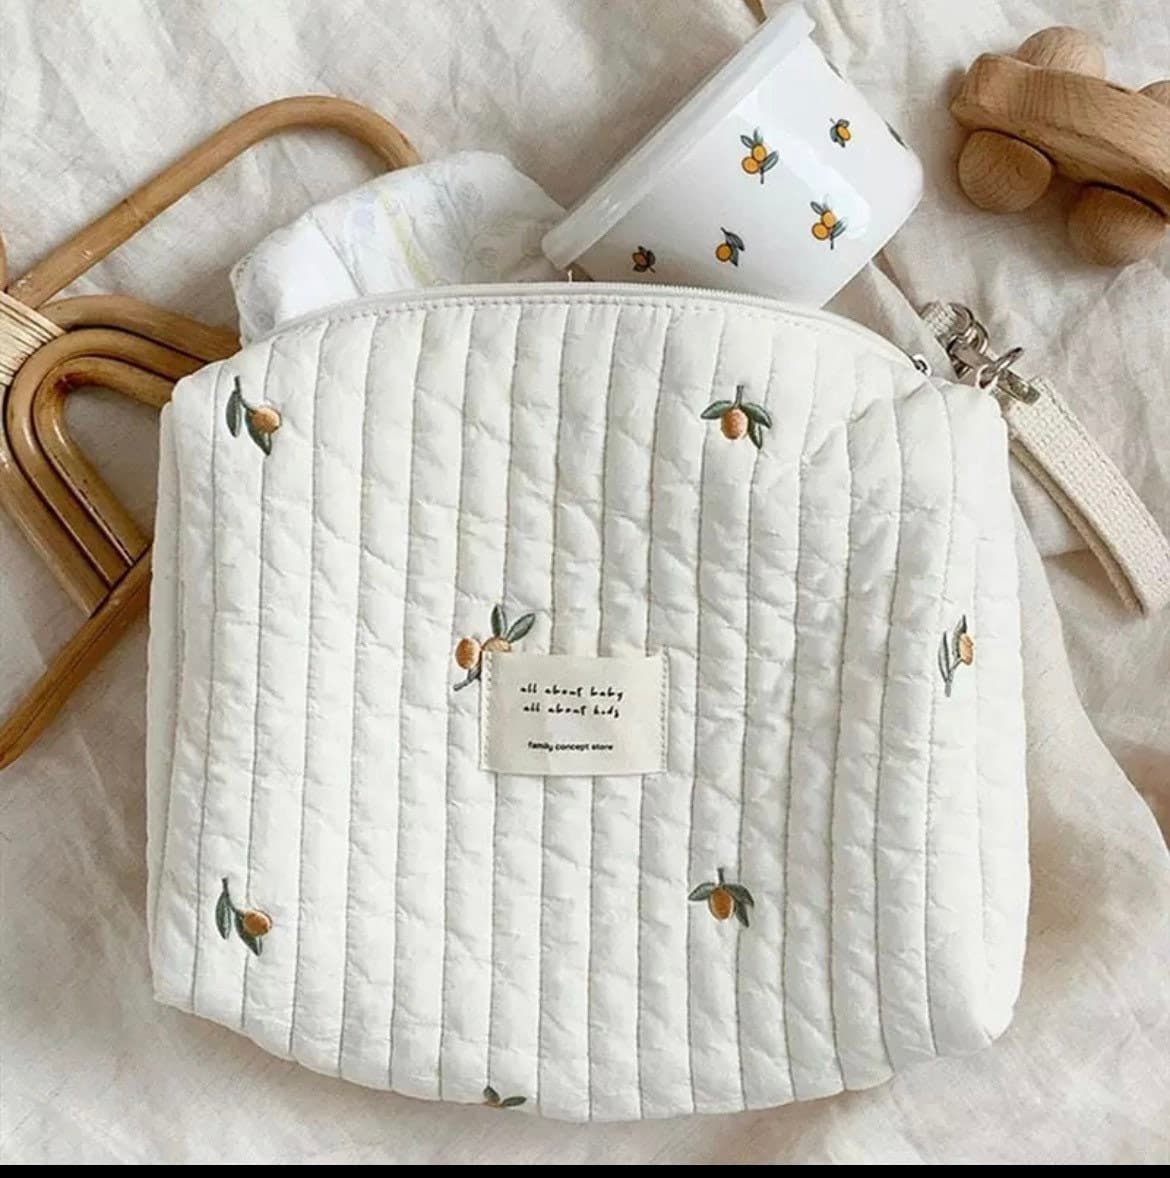 Stylish Small Quilted and Embroidered Pram/ Stroller Nappy/Diaper Bag-Happy baby, happy mummy!
Make your outings with your baby easy and nappy changing an enjoyable experience .
Get organised with this stunning quilted baby bag for you-Bijou Bubs